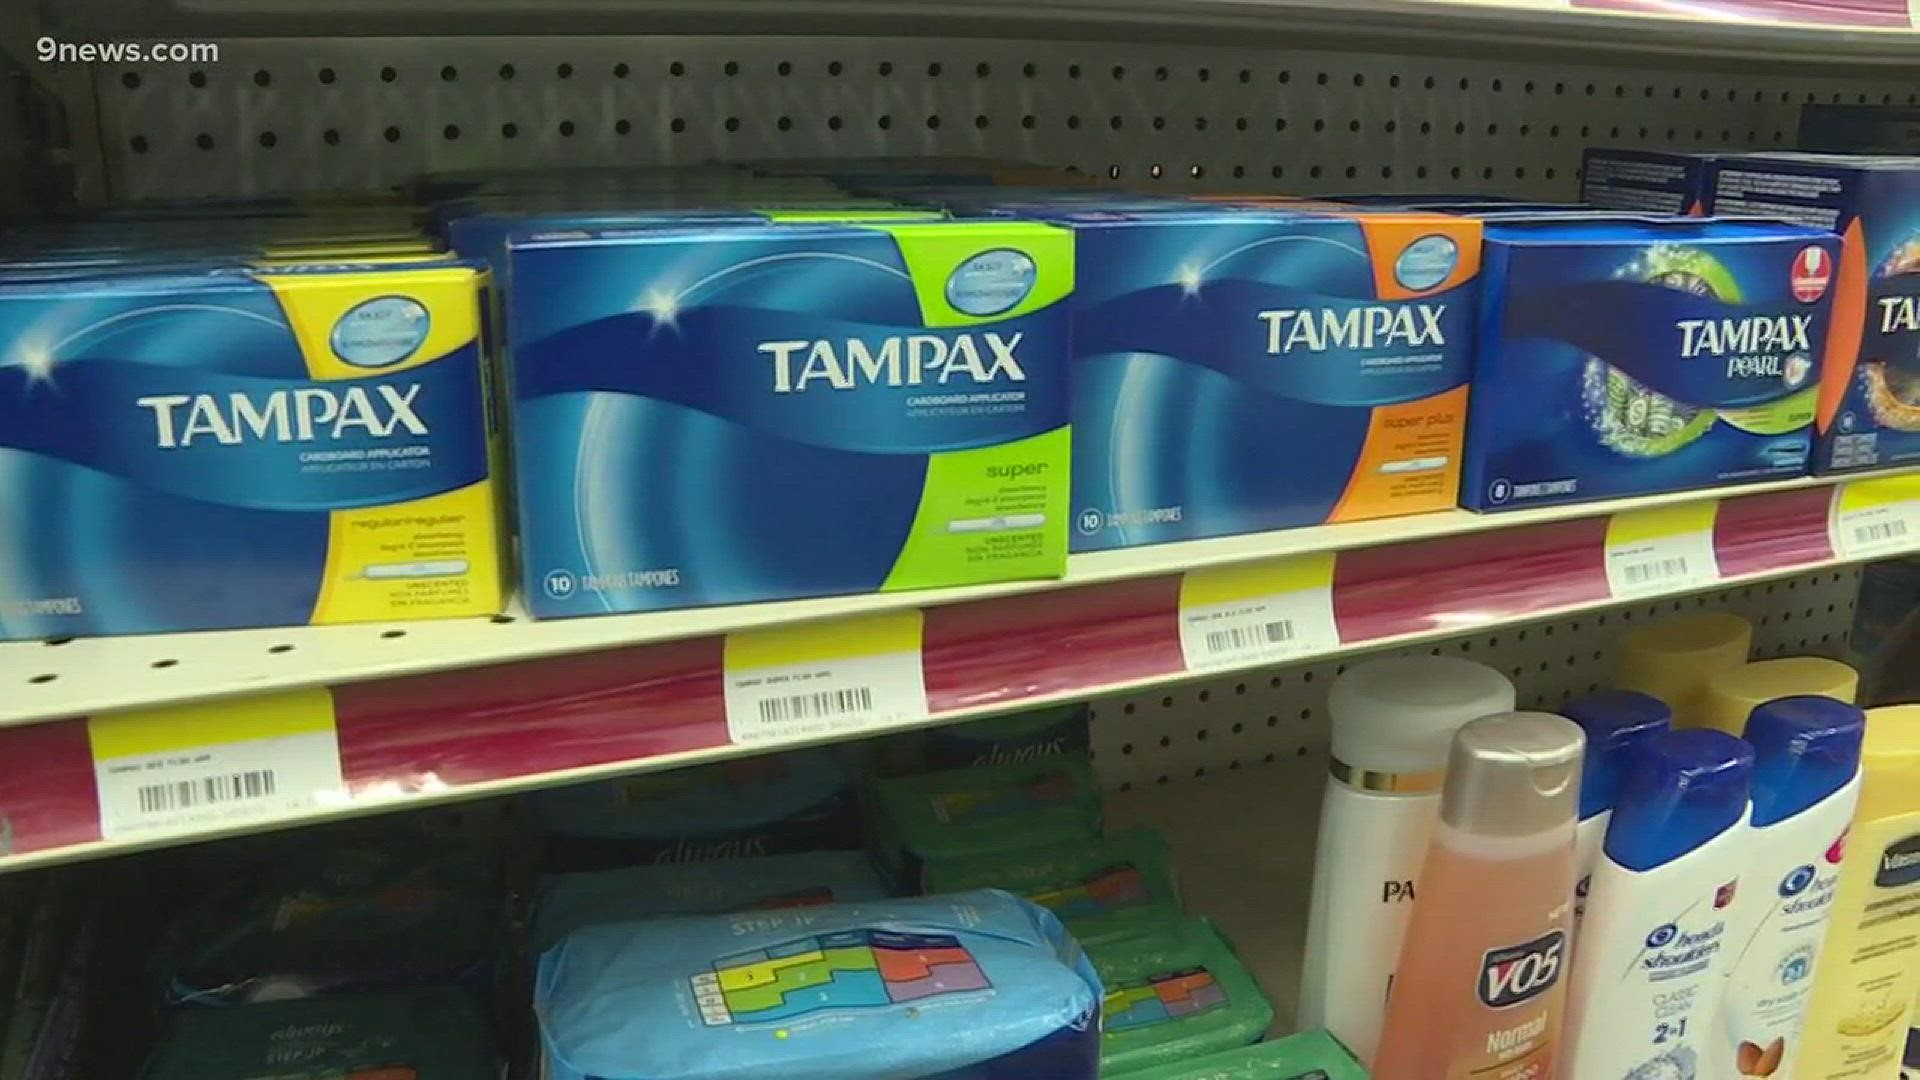 A new bill introduced in the Colorado House of Representatives would require local and county jails to provide tampons for free to inmates.